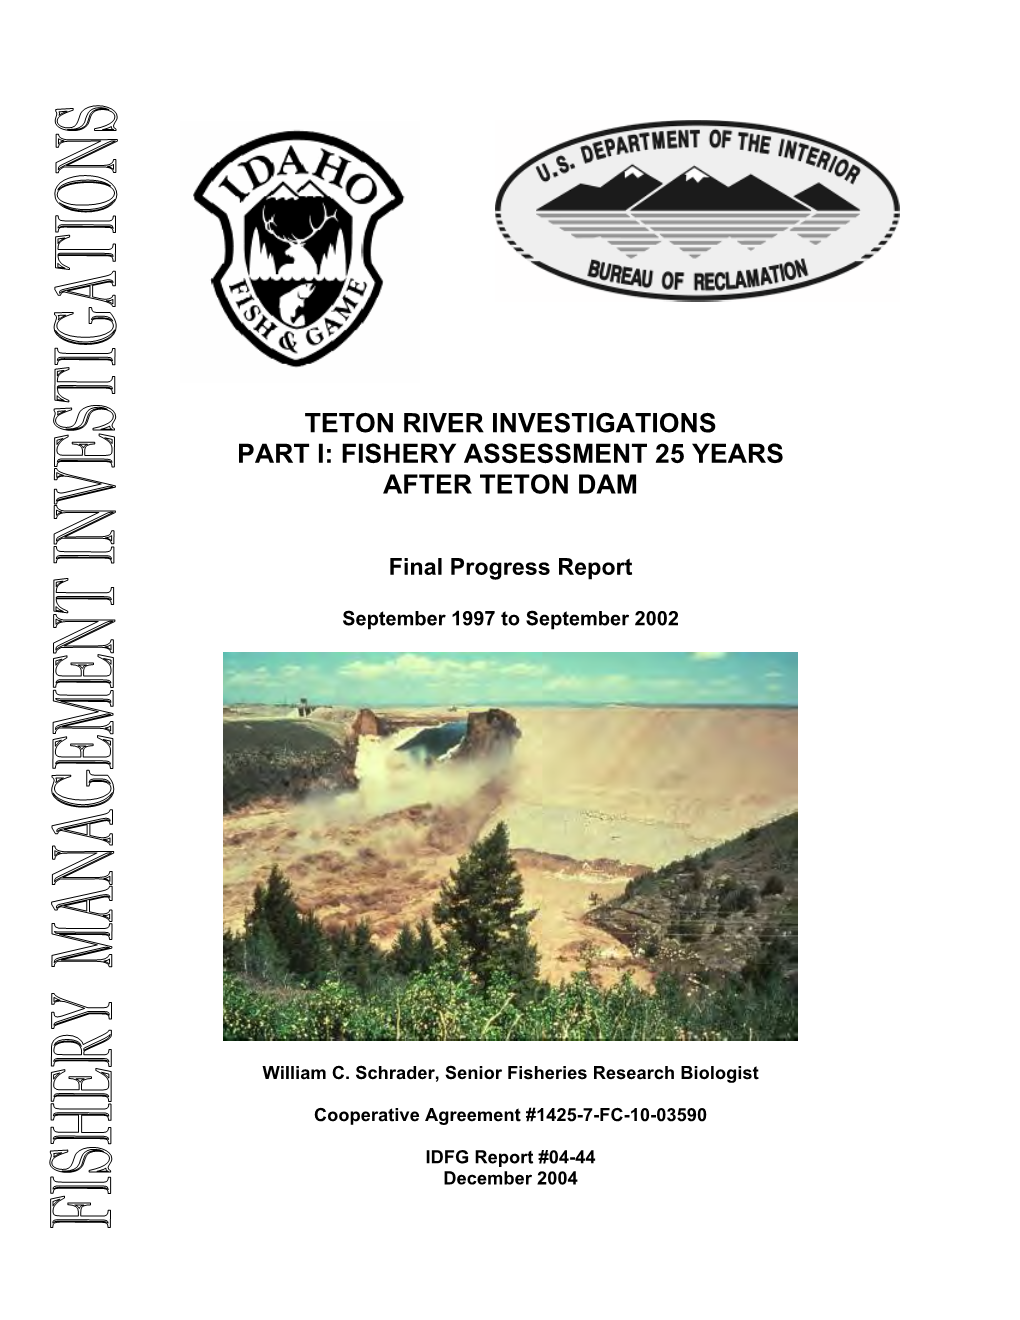 Teton River Investigations Part I: Fishery Assessment 25 Years After Teton Dam